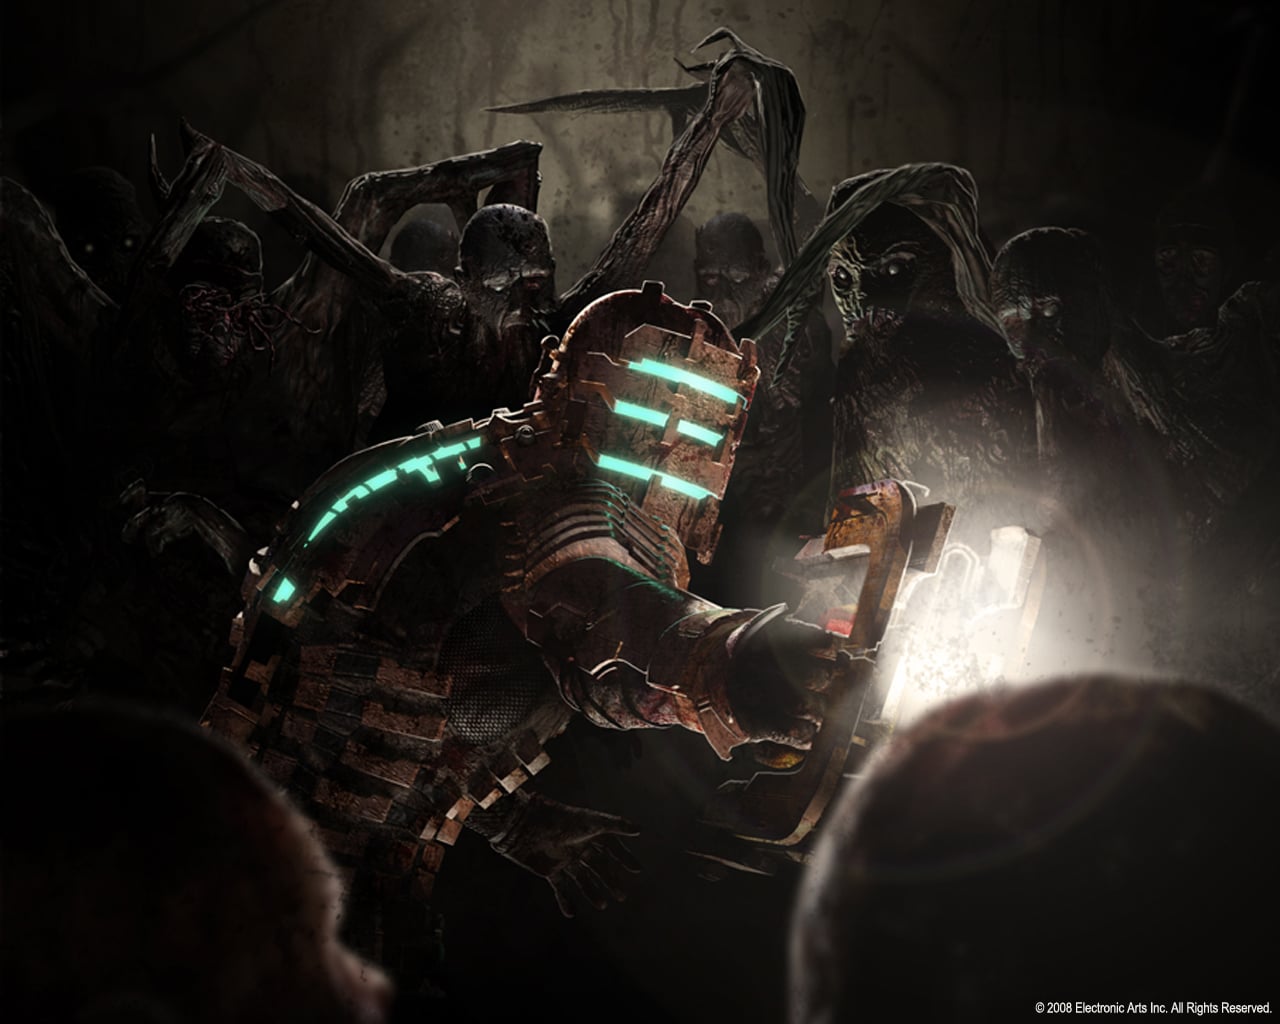 Dead Space Movie based on videogame being planned